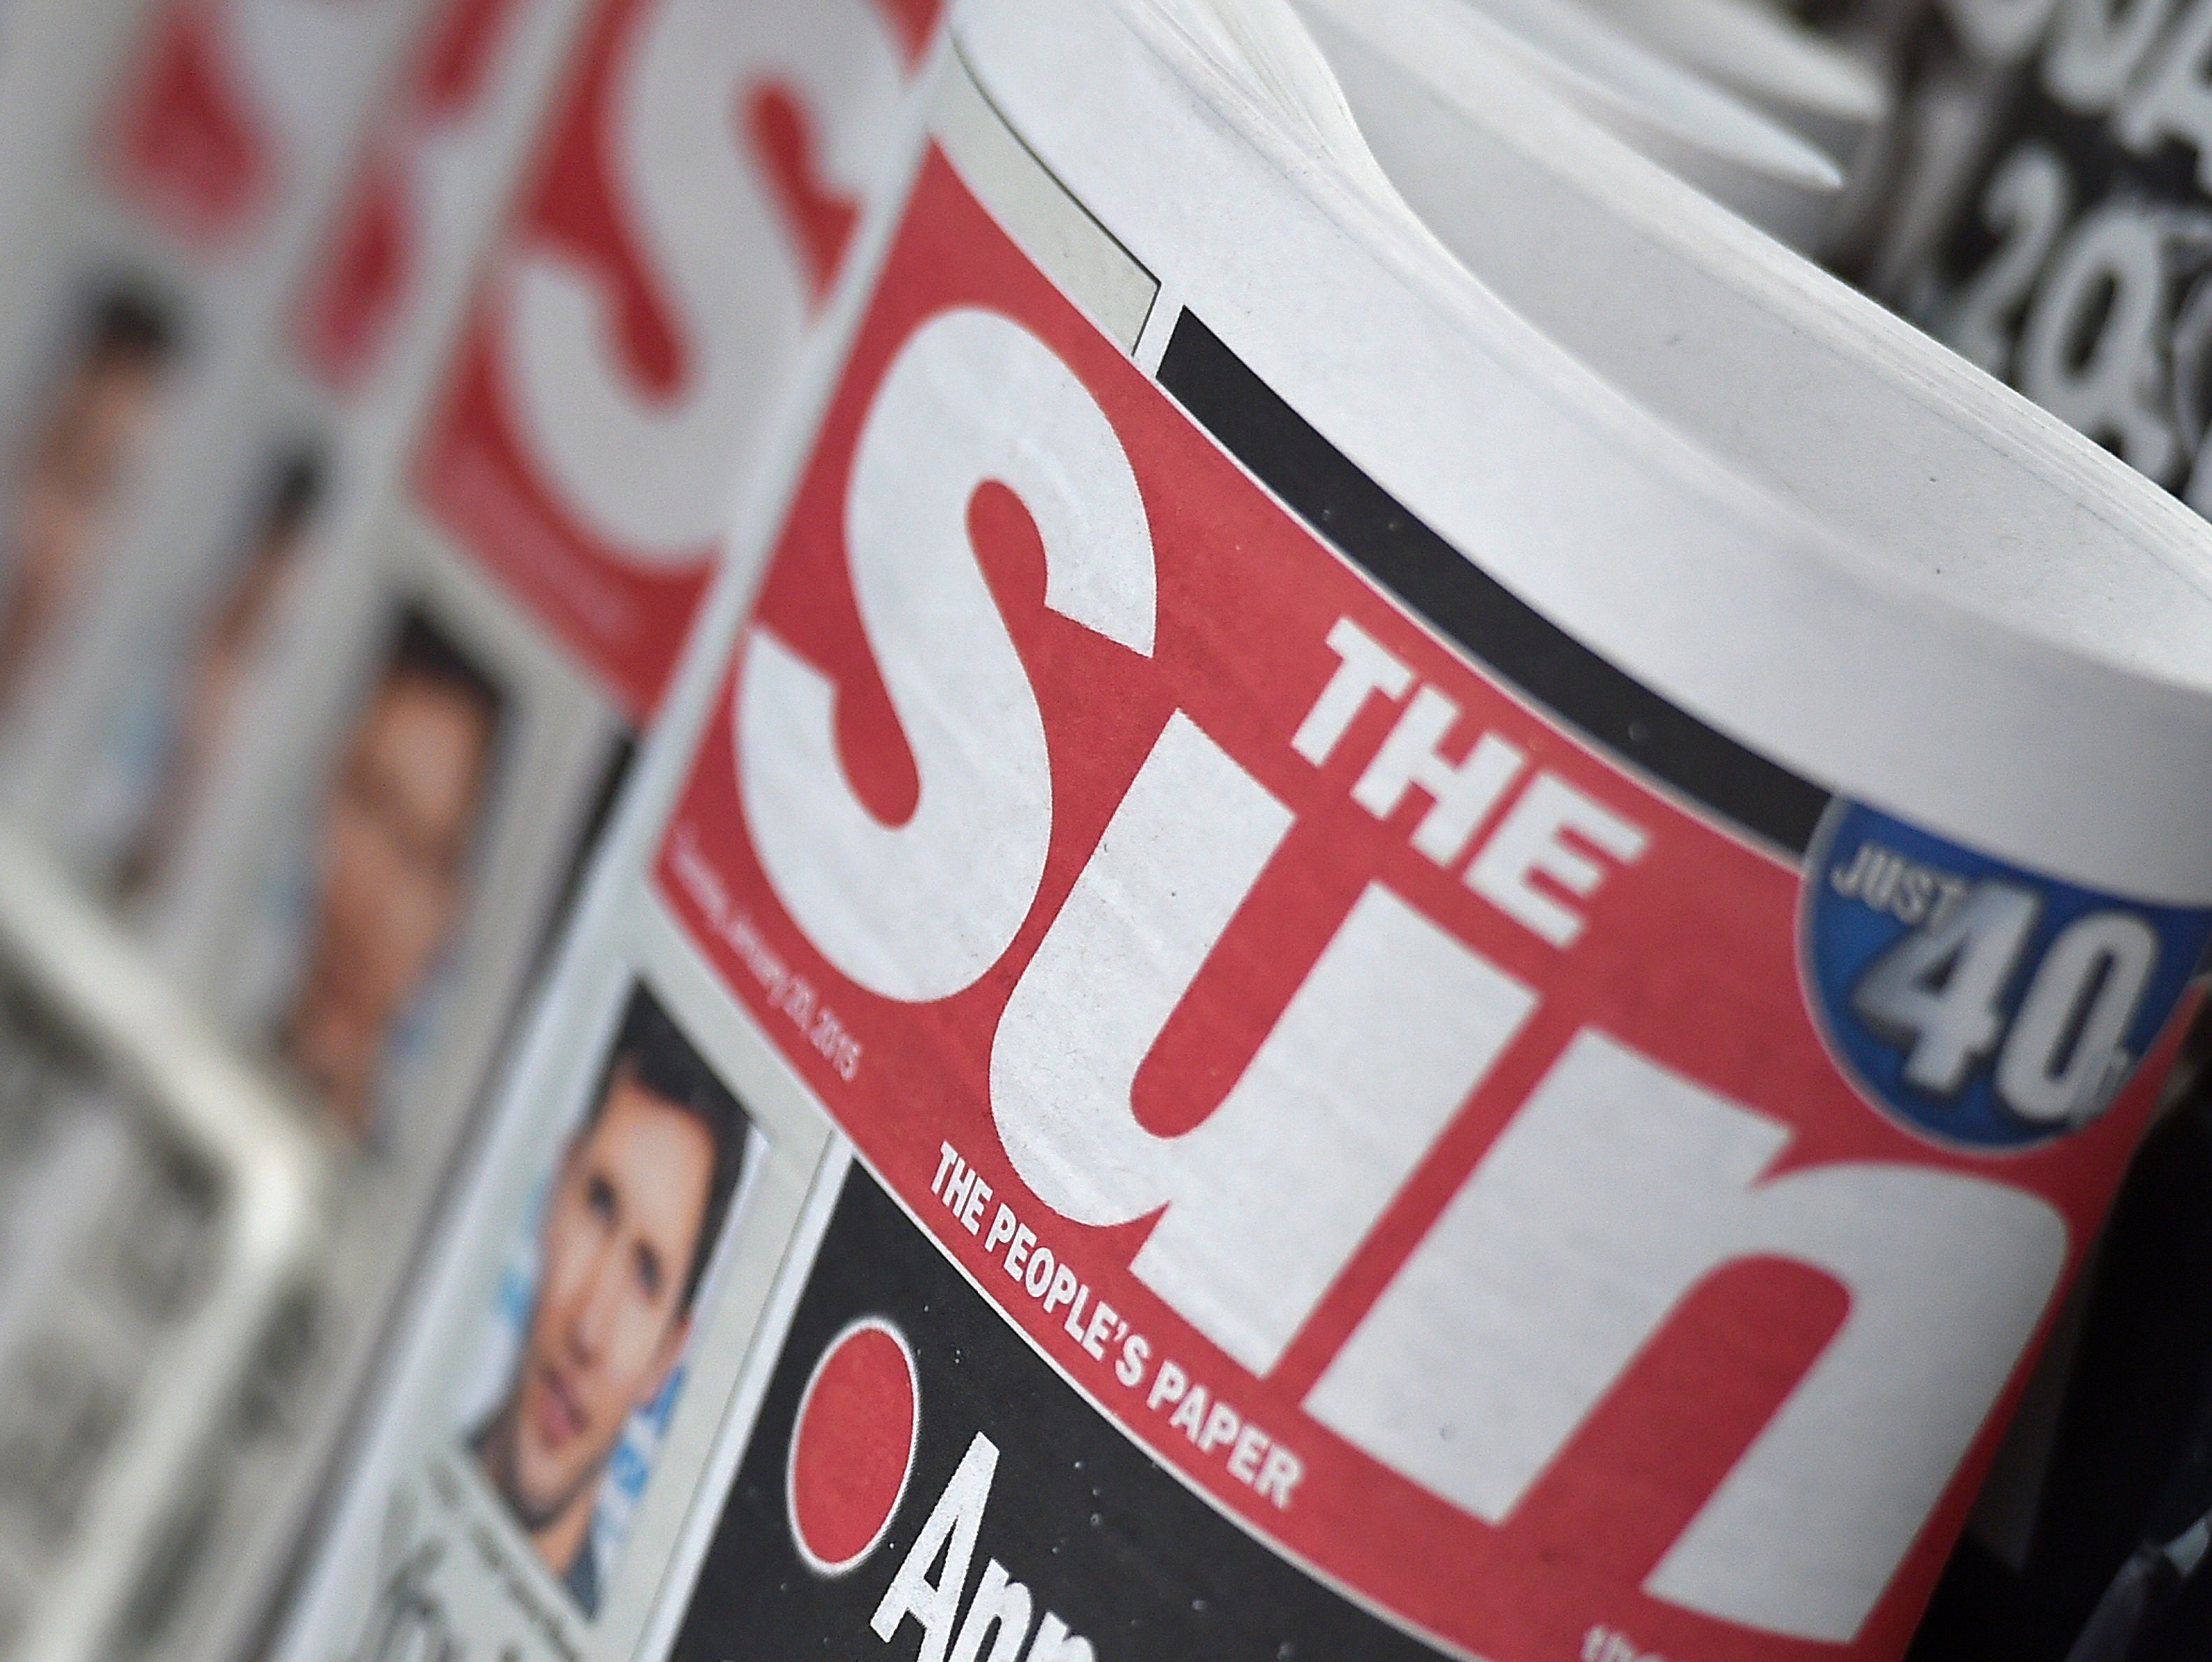 Sun boasts largest monthly readership across UK national newsbrands but Guardian top on trust, according to Pamco